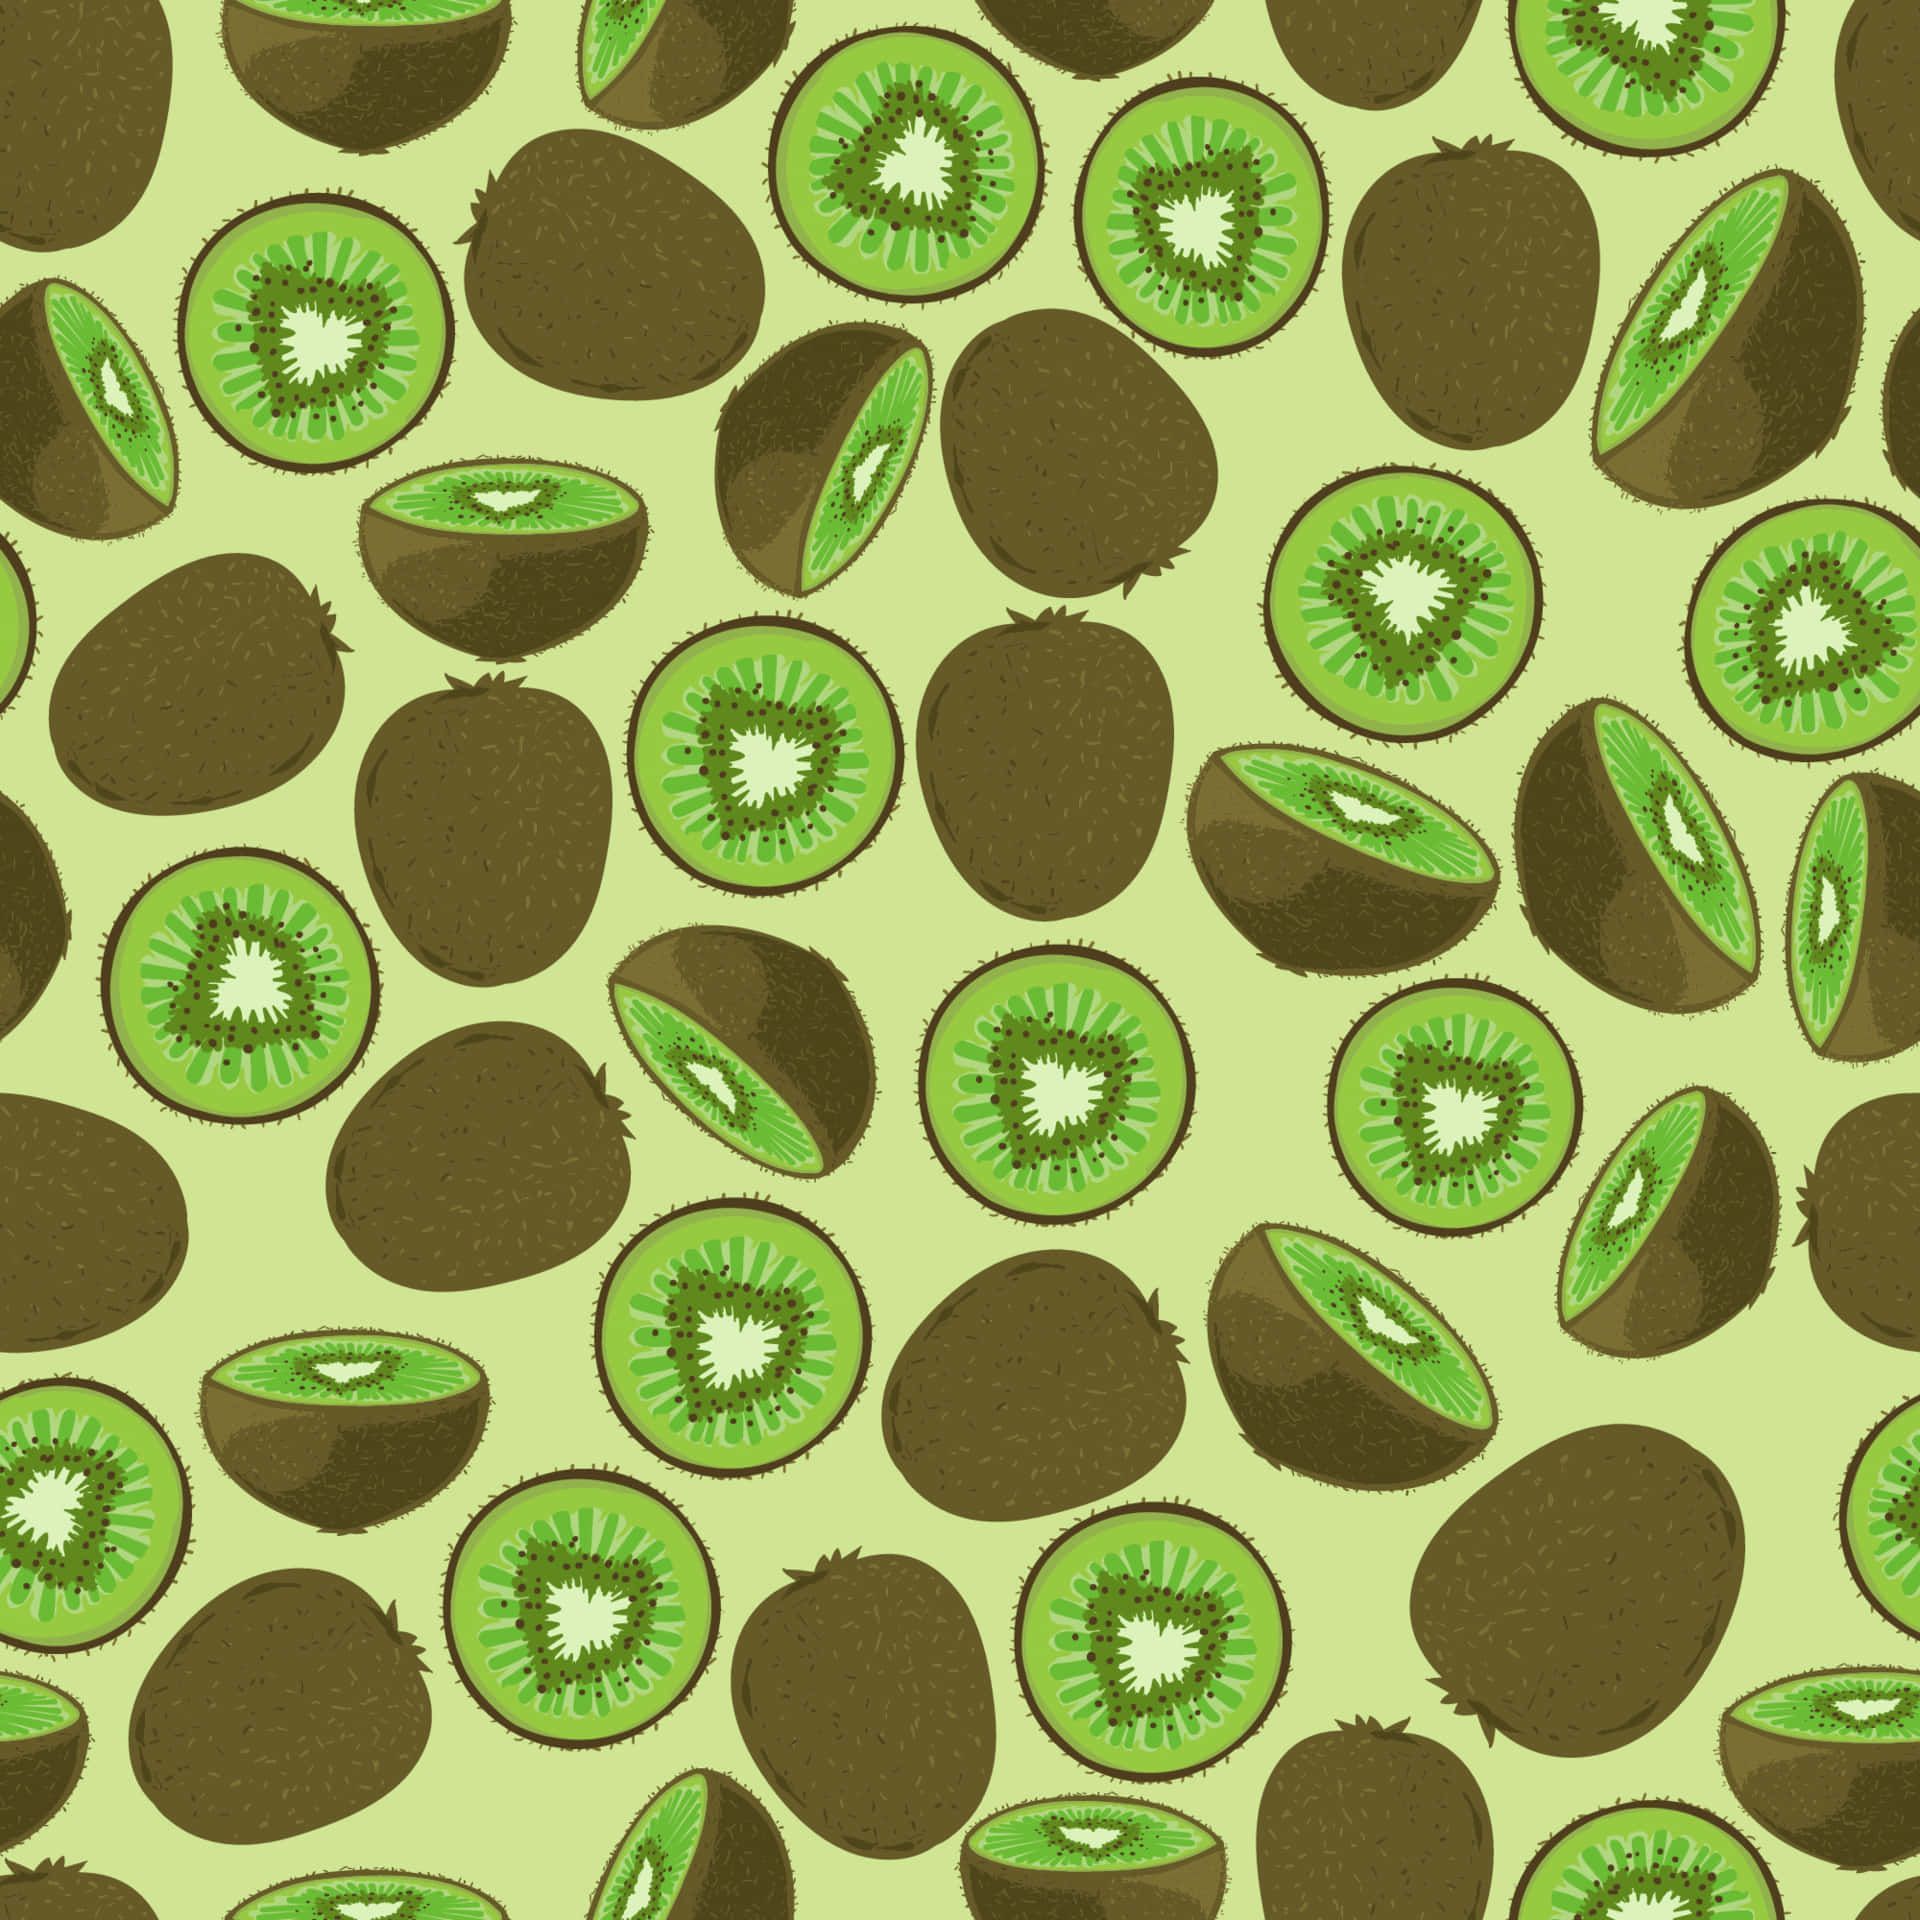 A pattern of whole and sliced kiwis on a green background - Kiwi